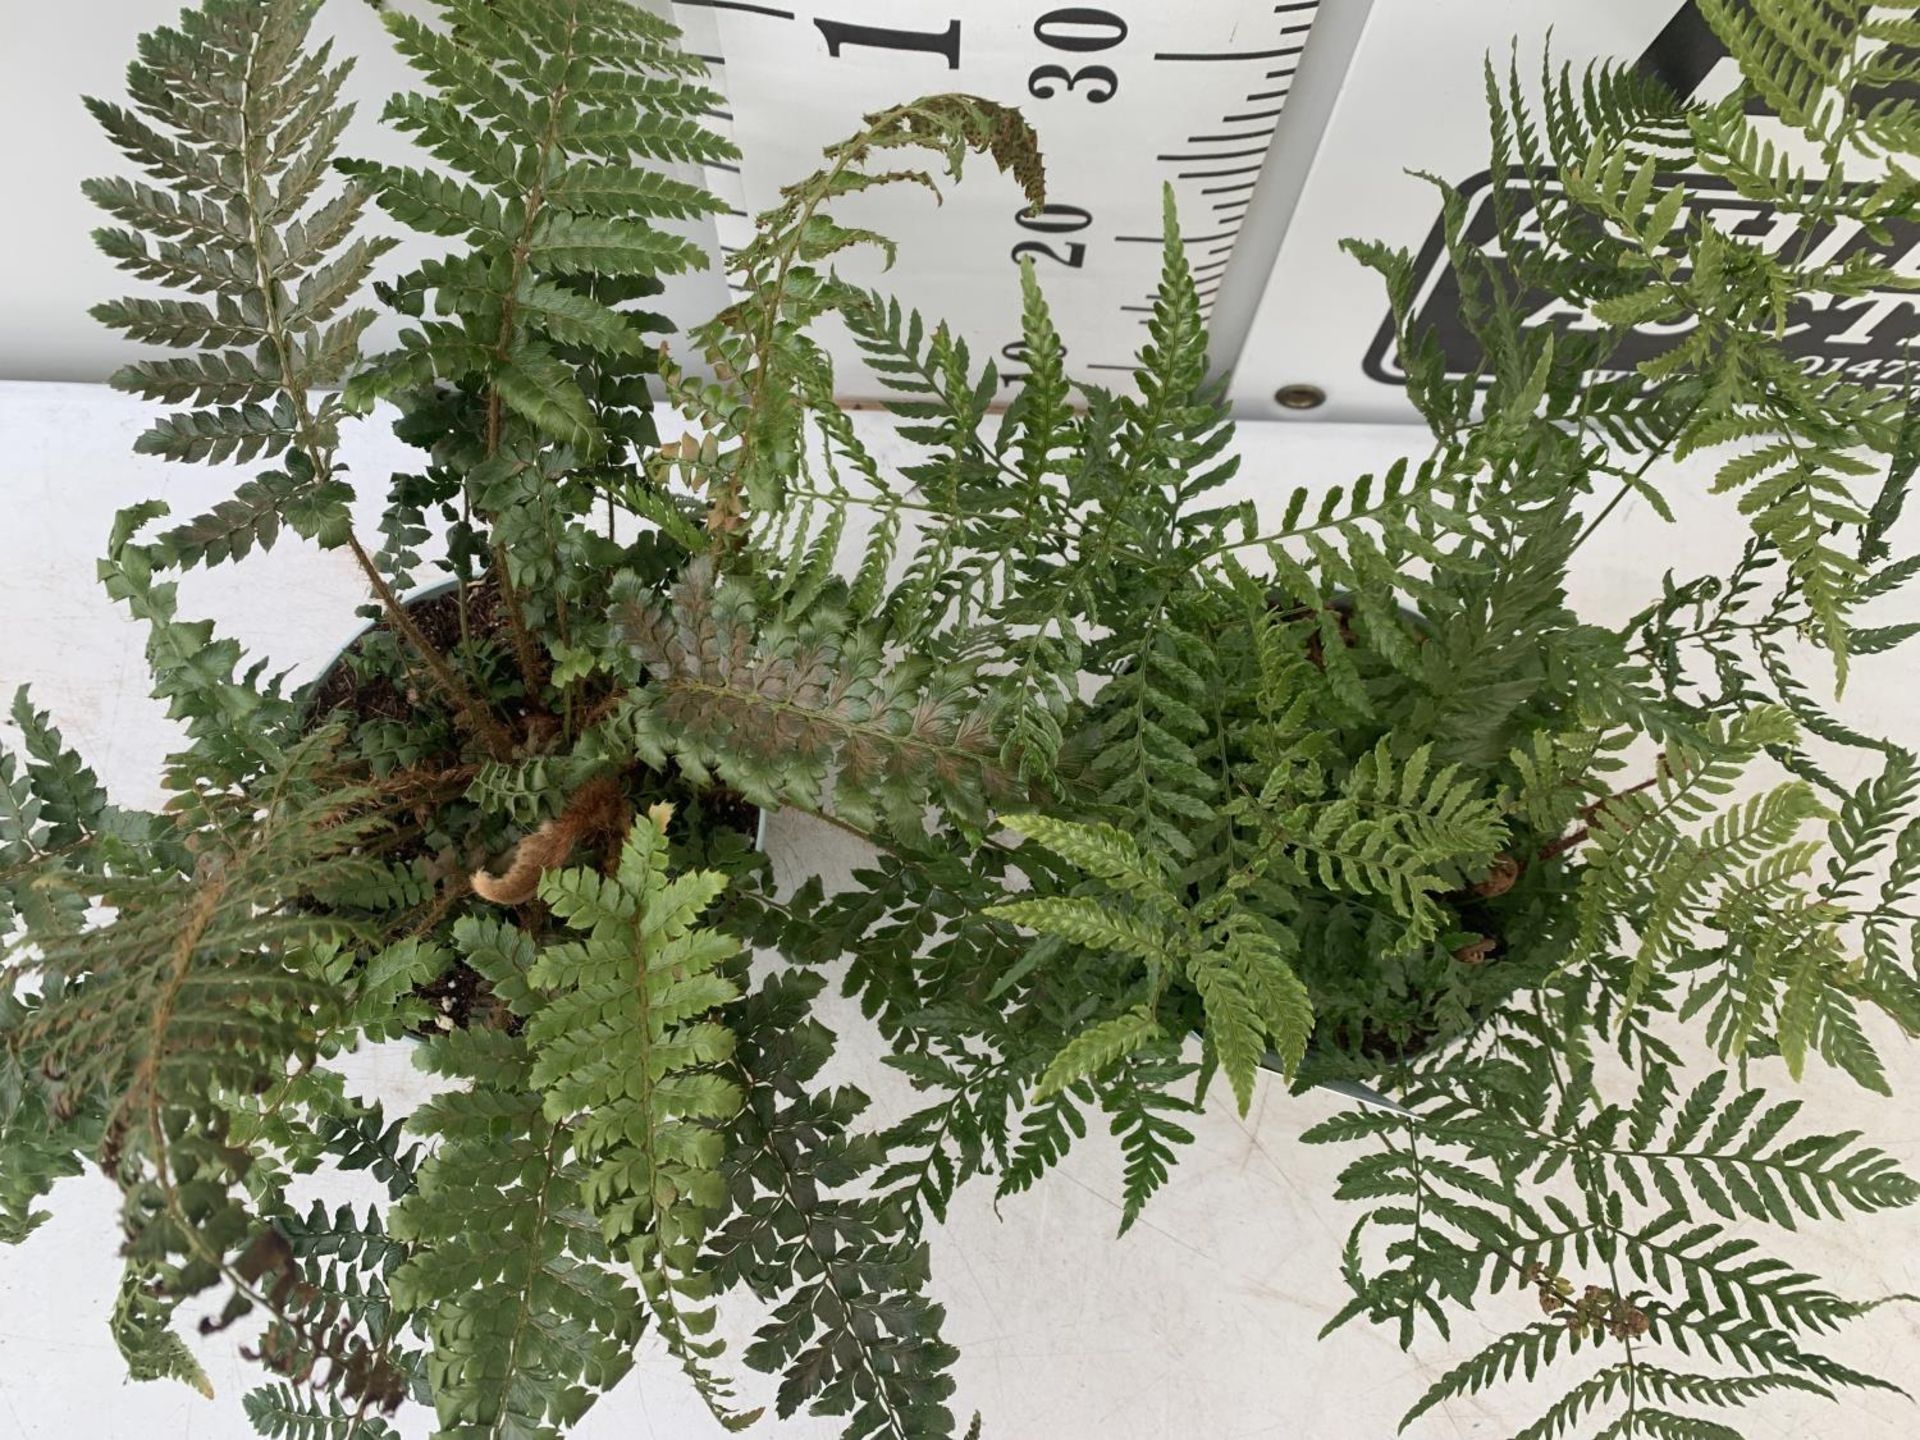 TWO FERNS 'DRYOPTERIS ERYTHROSORA' AND 'POLYSTICHUM POLYBLEPHARUM JADE' IN 2 LTR POTS APPROX 40CM IN - Image 4 of 8